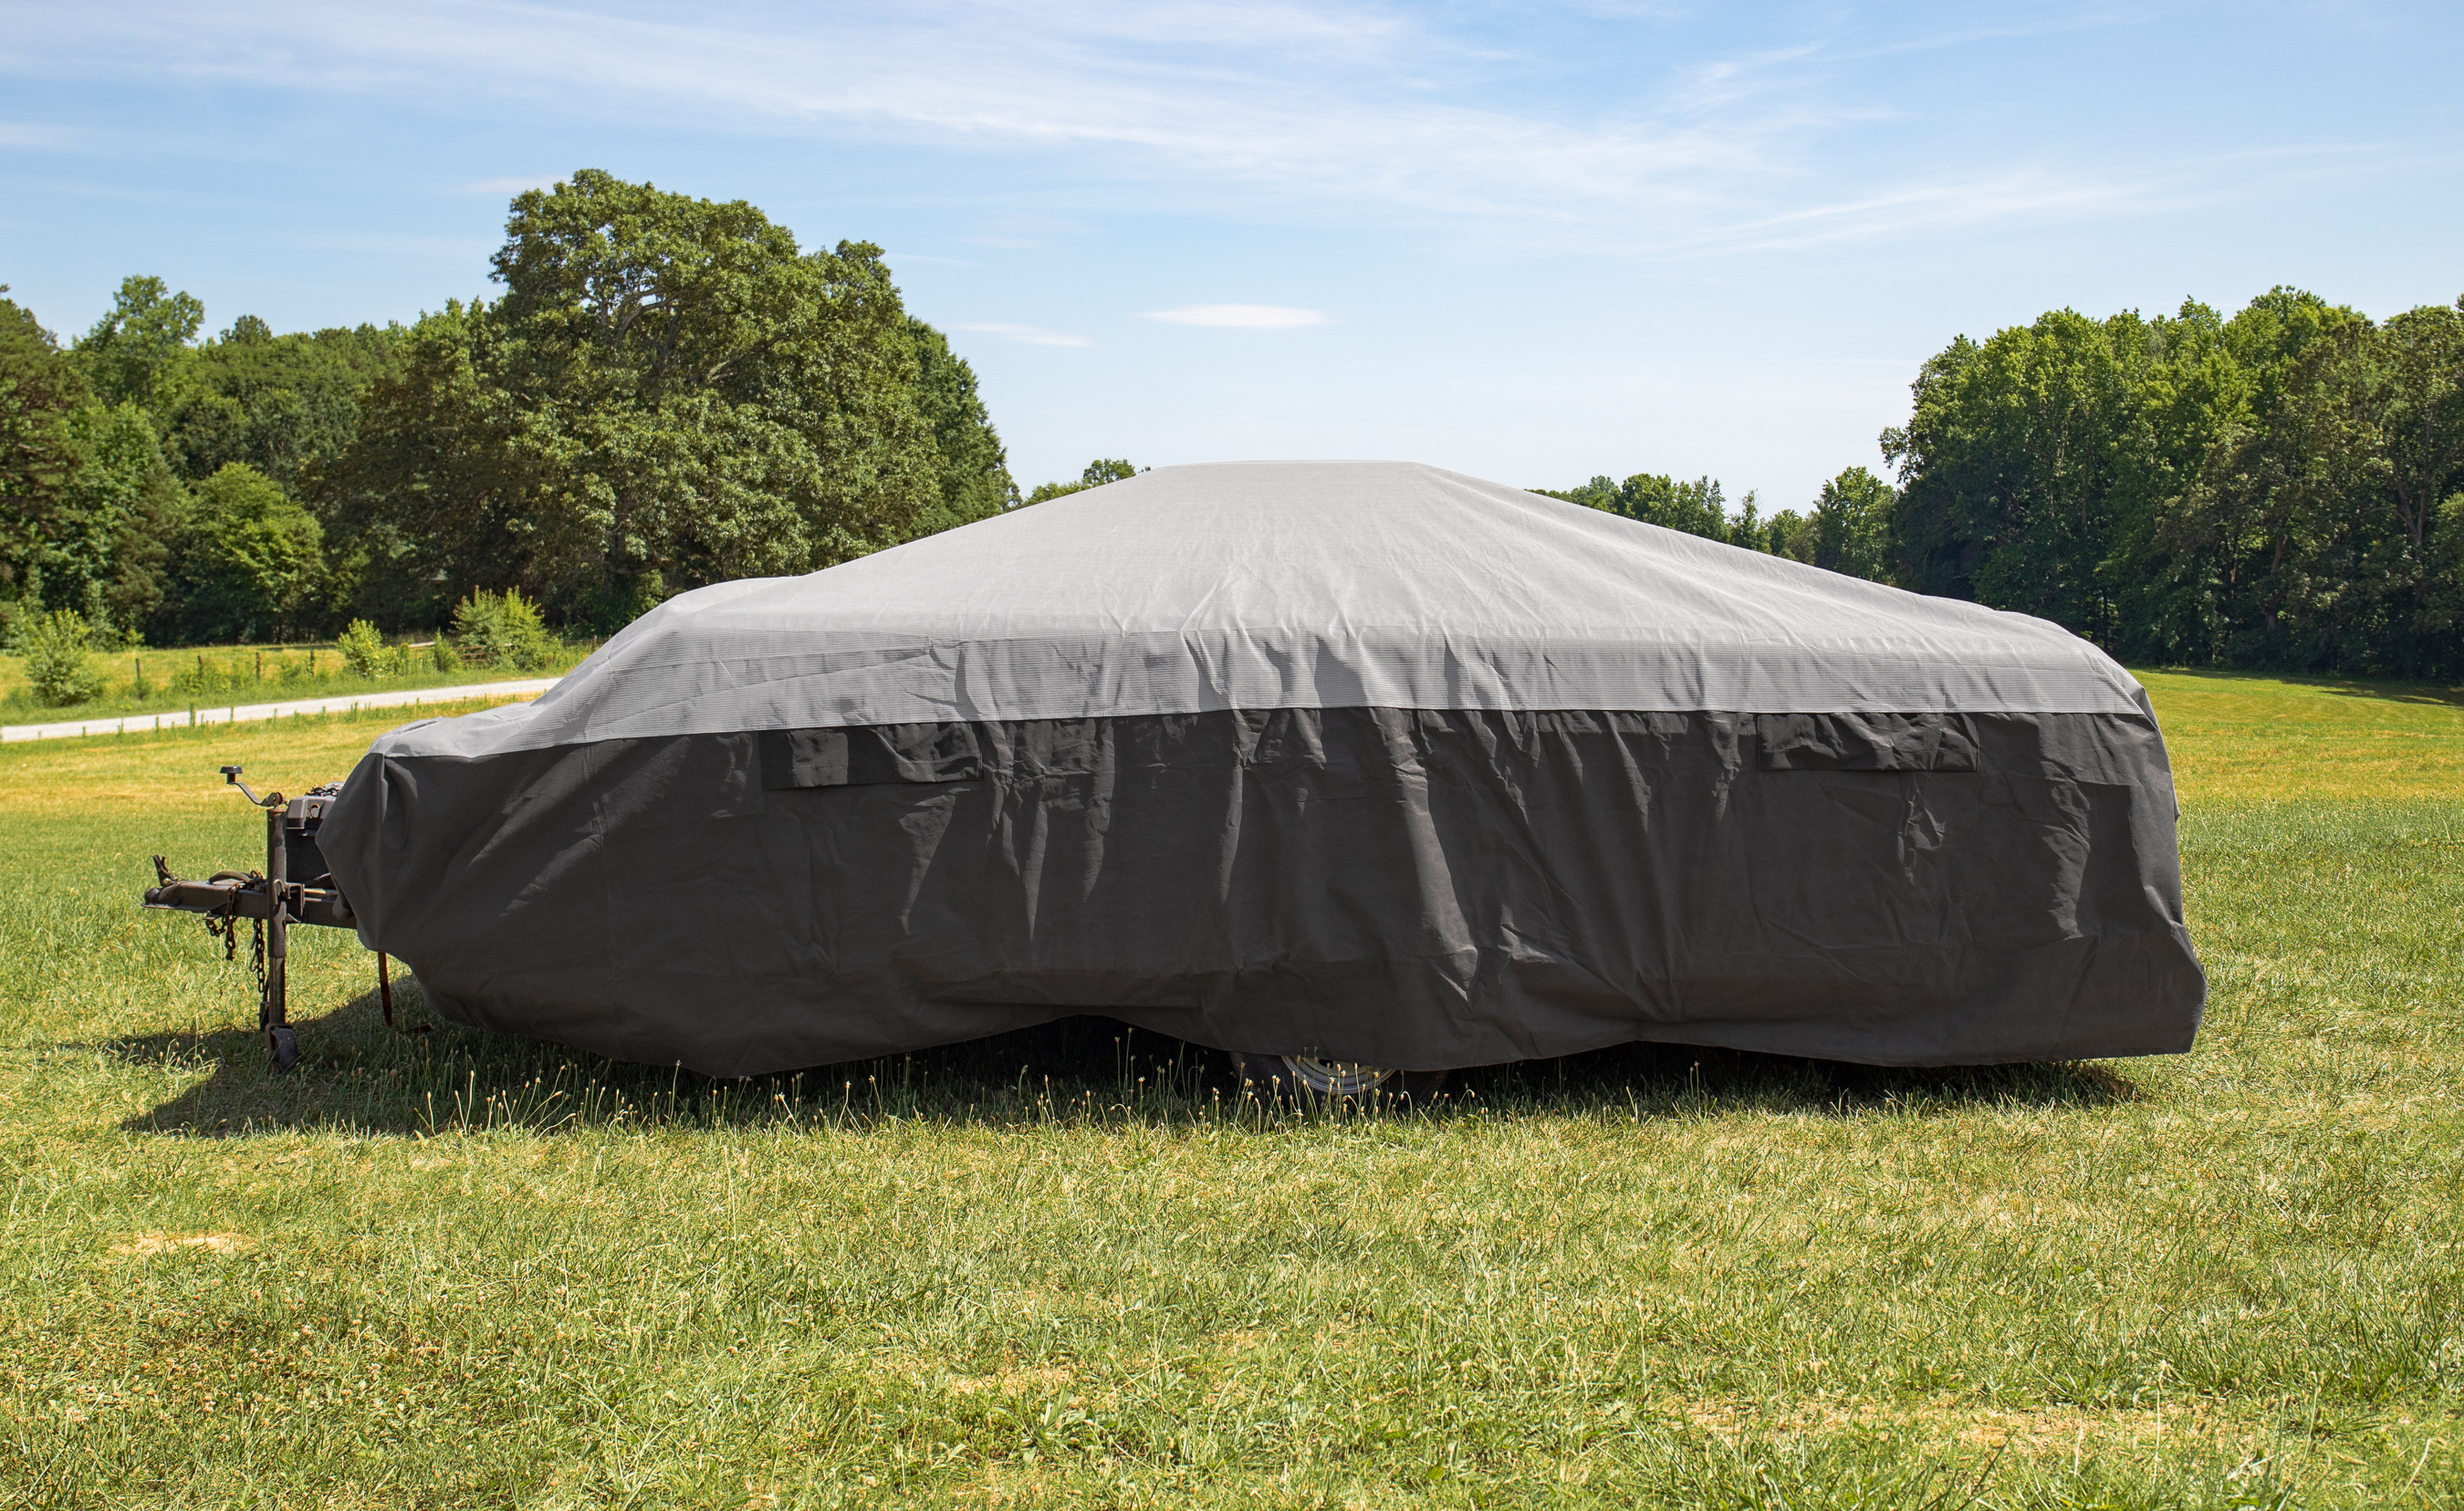 Camco ULTRAGuard RV Cover Fits Pop-Up Campers 14 to 16-feet Extremely  Durable Design that Protects Against the Elements (45764)